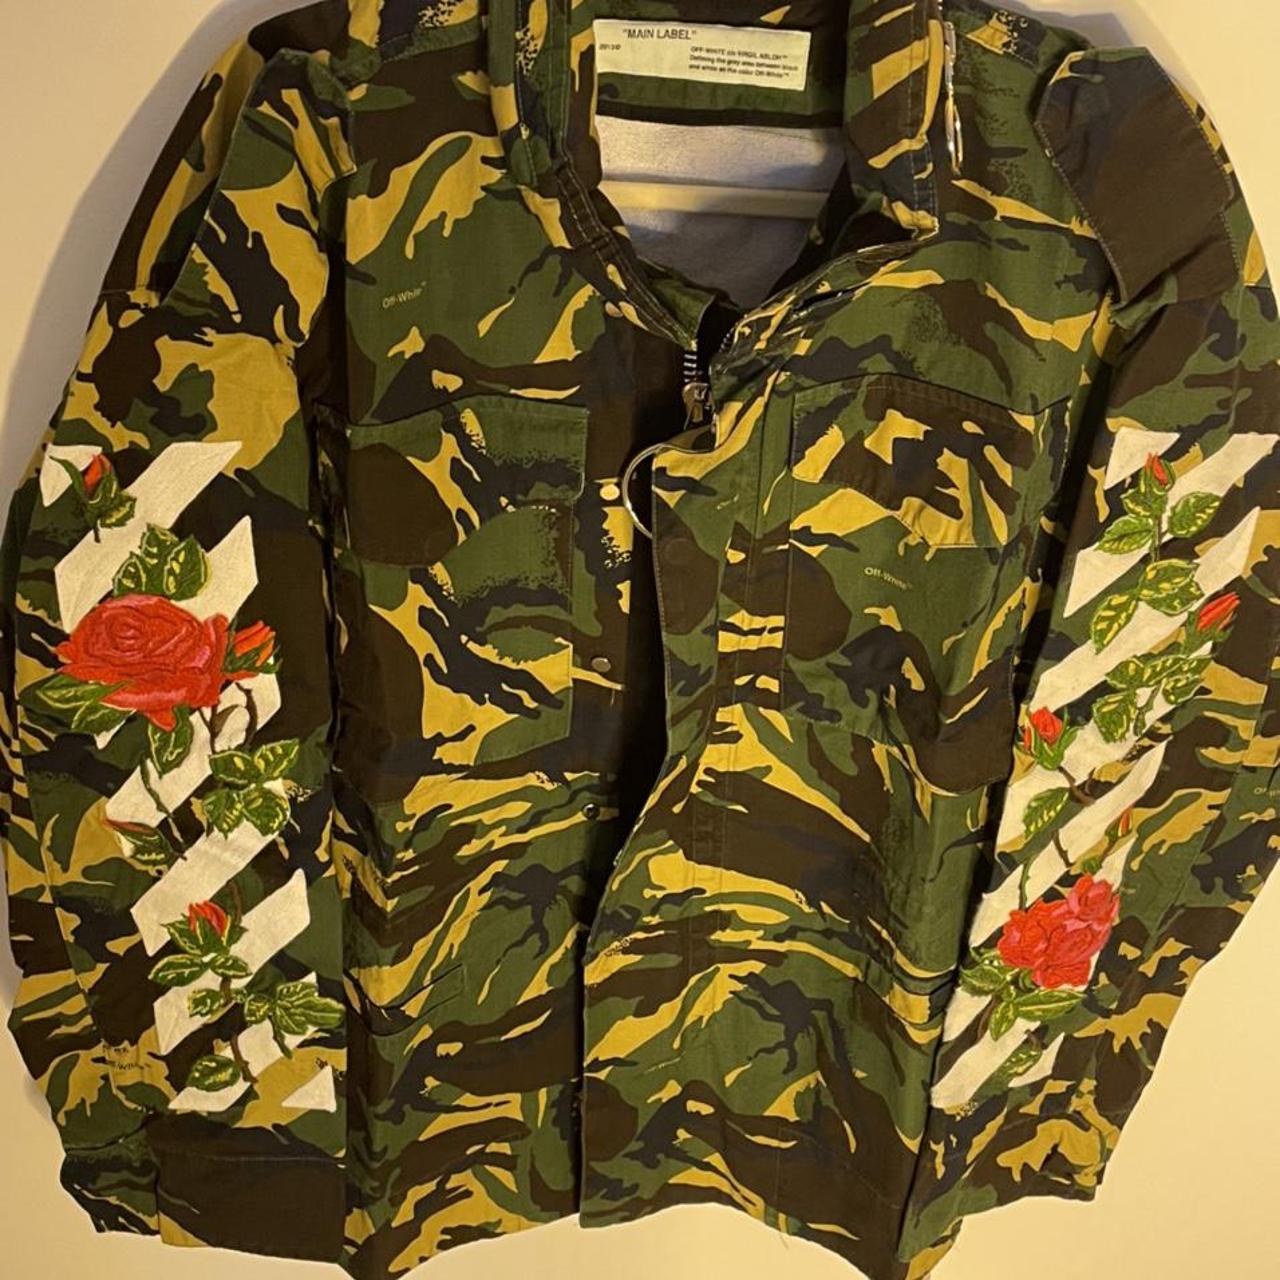 OFF-WHITE c/o Virgil Abloh Field Jacket (Camouflage)